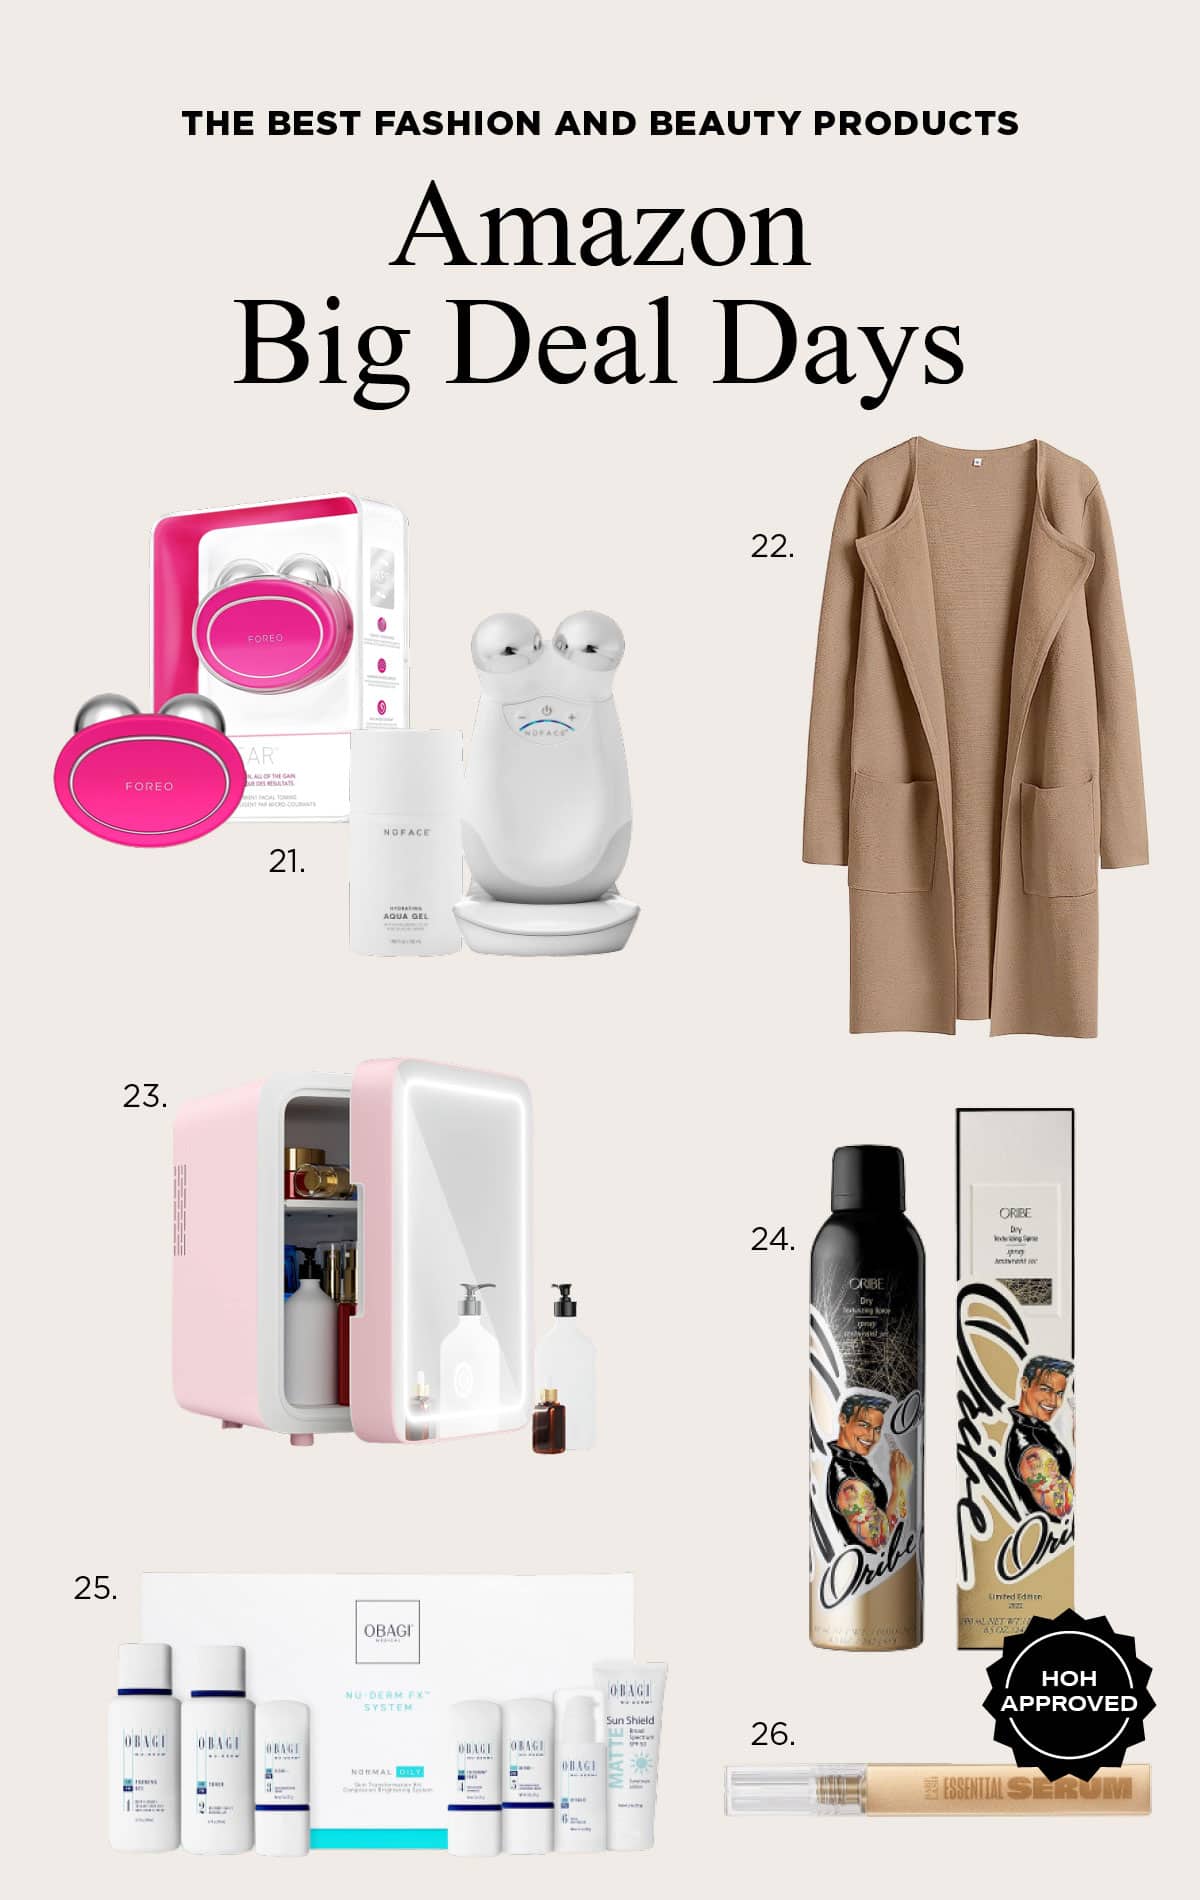 Best of Beauty and Fashion - Amazon Prime Big Deal Days - check out the best beauty products like these microcurrent facial devices and skincare refrigerator.